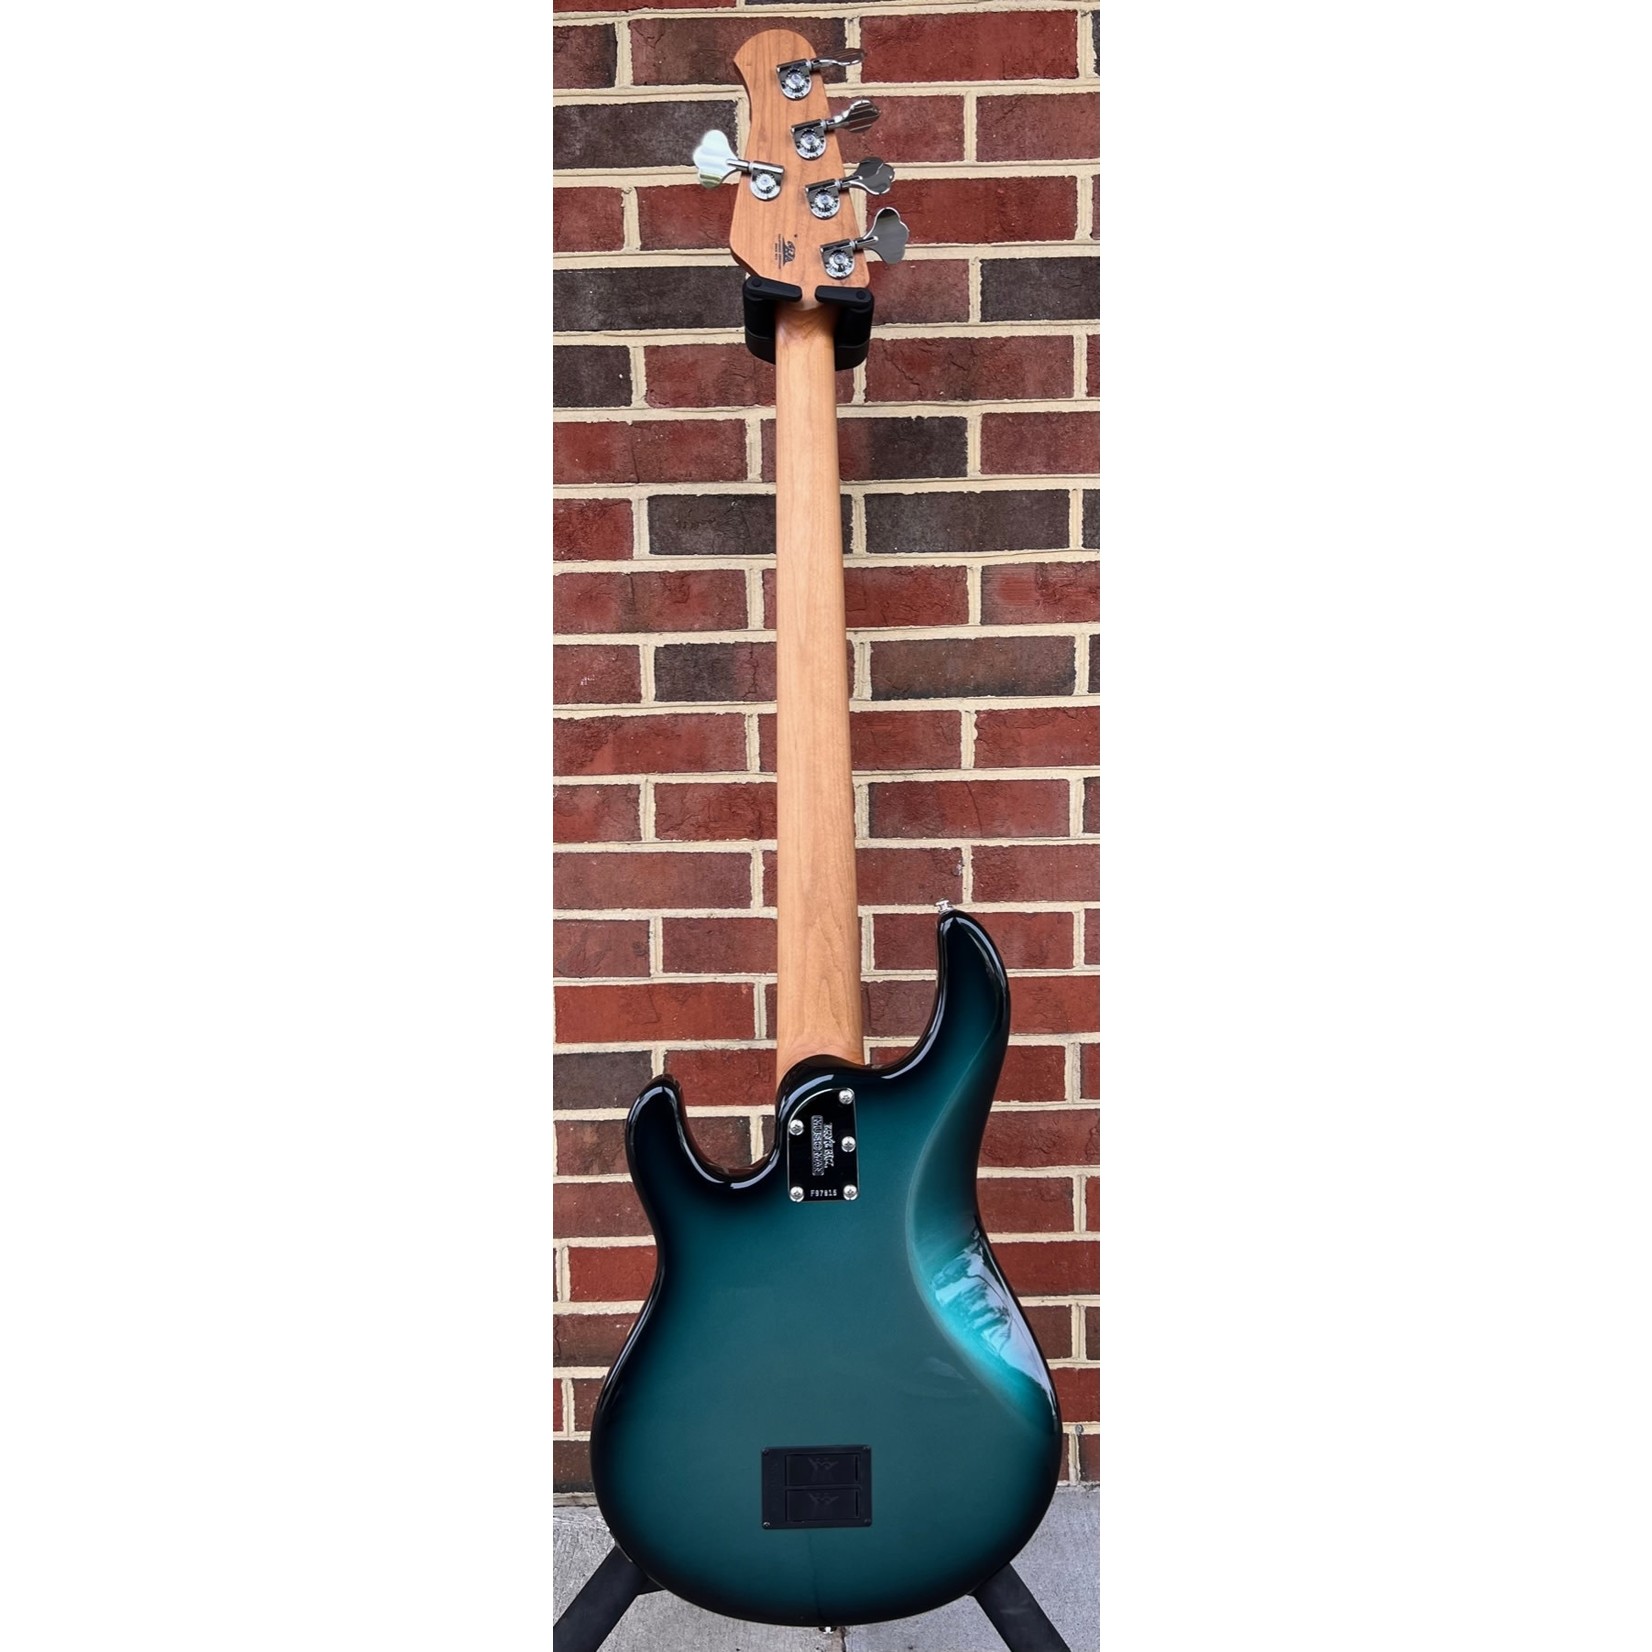 Stingray　Neck,　Case　Music　5-String,　Mono　Man　Man　Fretboard,　Music　Pearl,　Frost　Maple　Maple　Roasted　Roasted　Music　H,　Special　The　Green　Loft